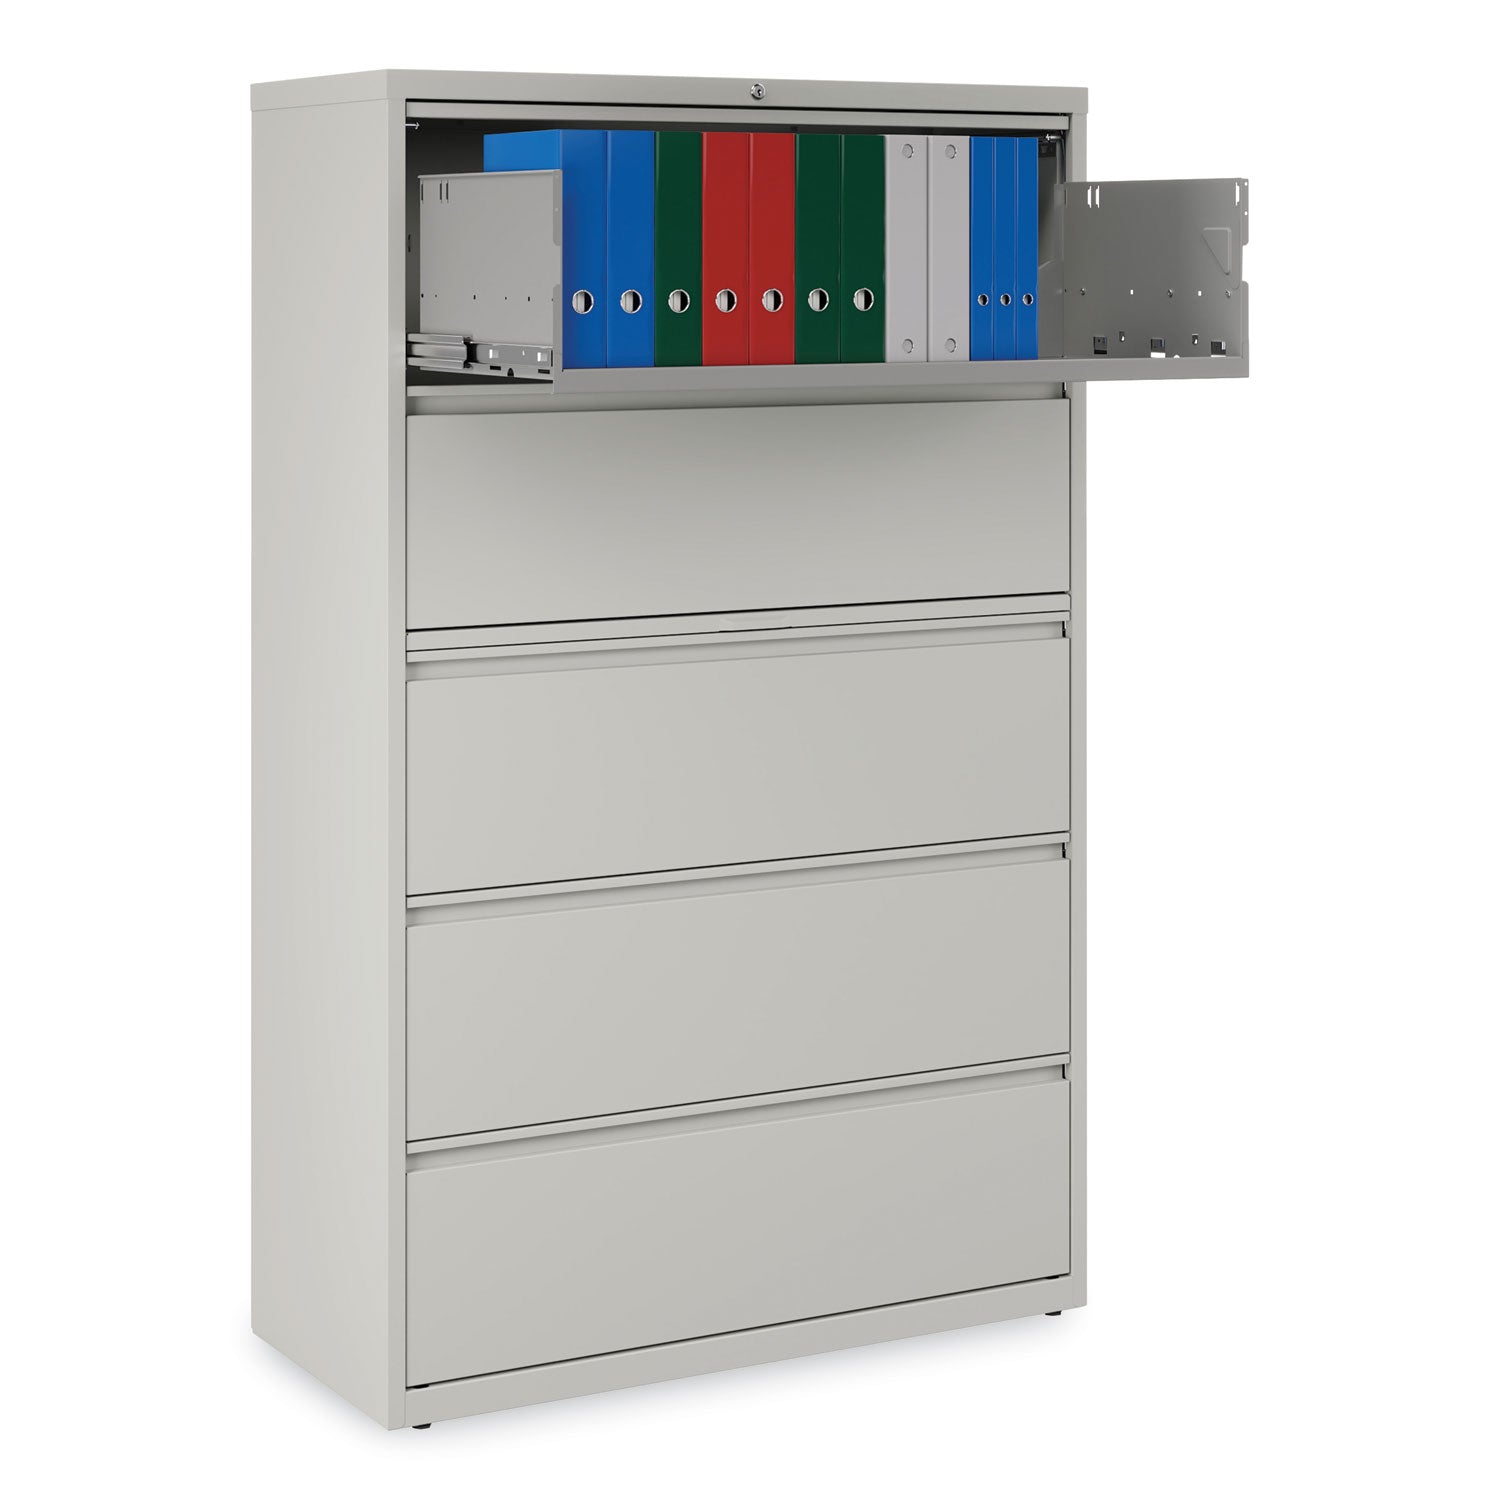 lateral-file-5-legal-letter-a4-a5-size-file-drawers-1-roll-out-posting-shelf-light-gray-42-x-1863-x-6763_alehlf4267lg - 7